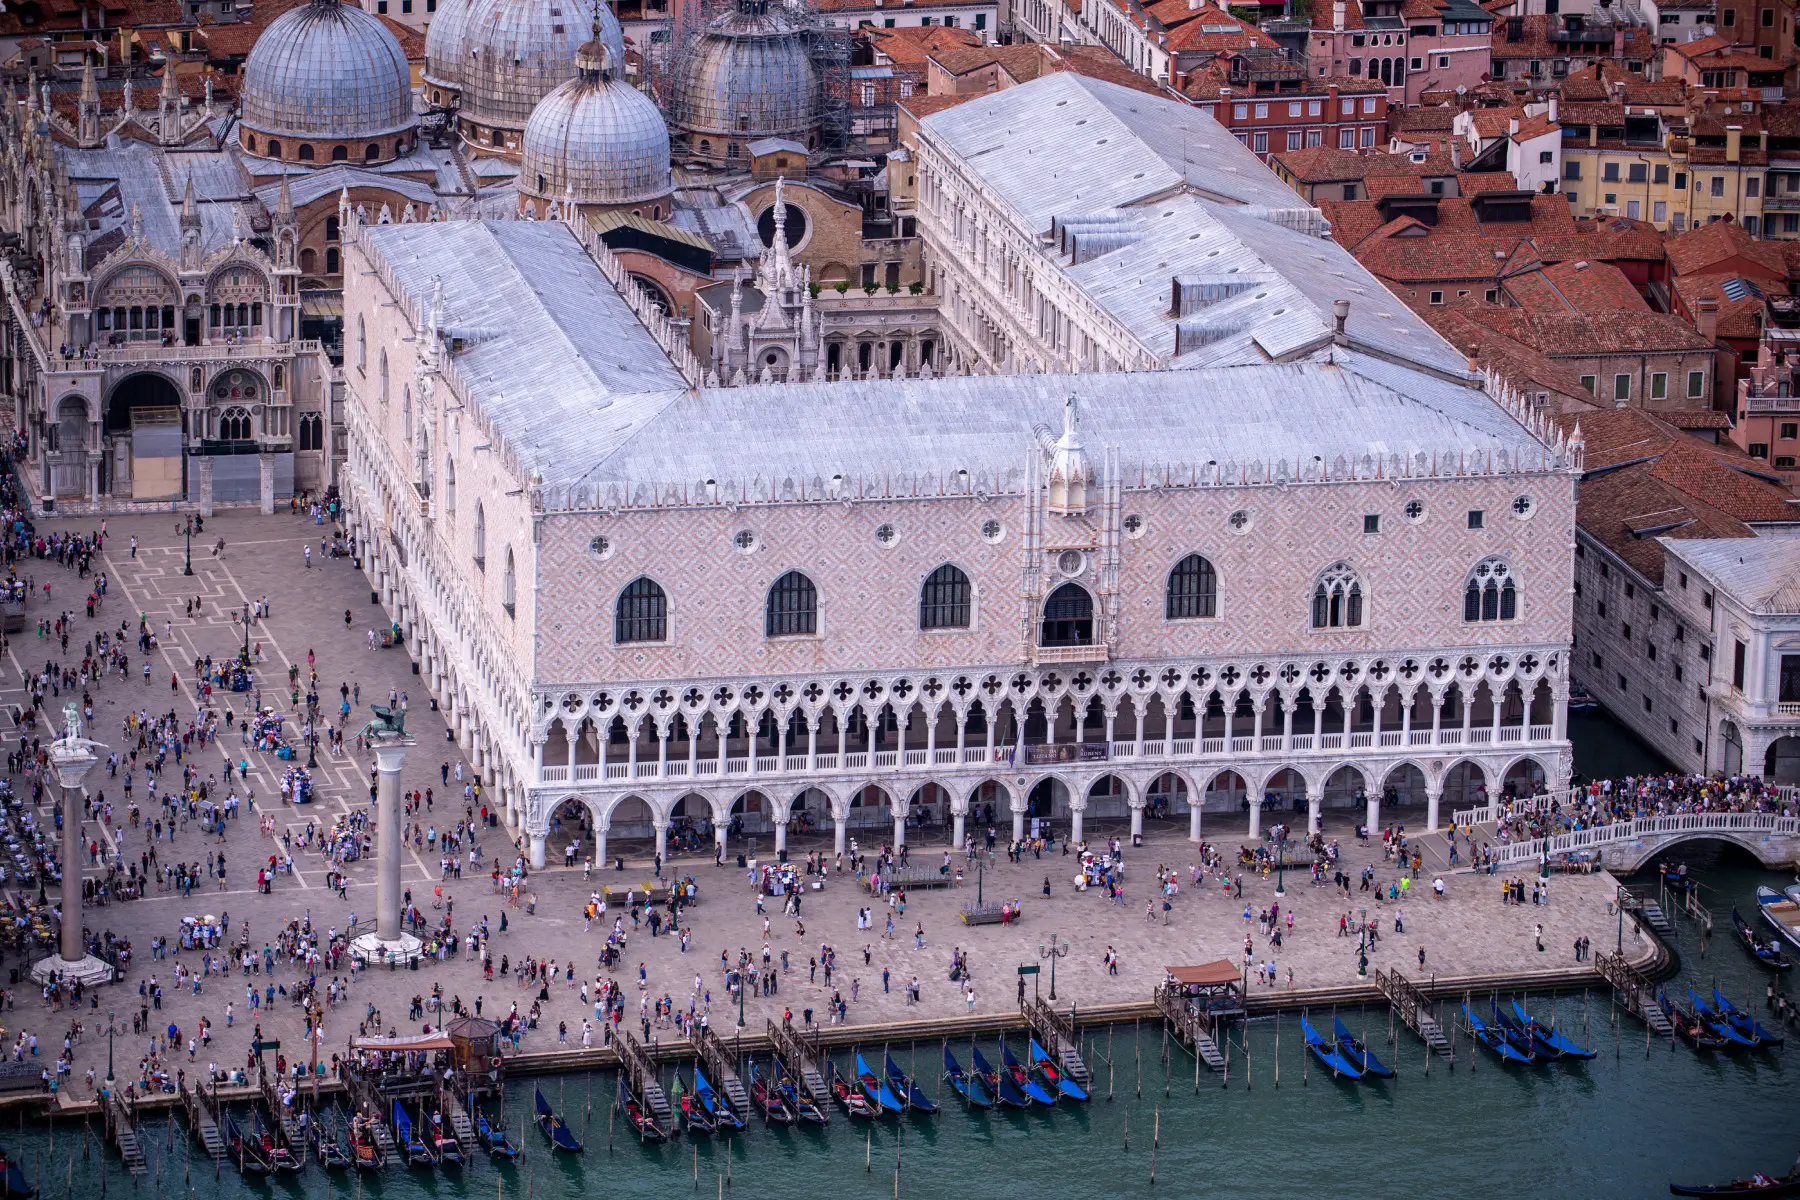 Arial view of Palazzo Ducale in Venice